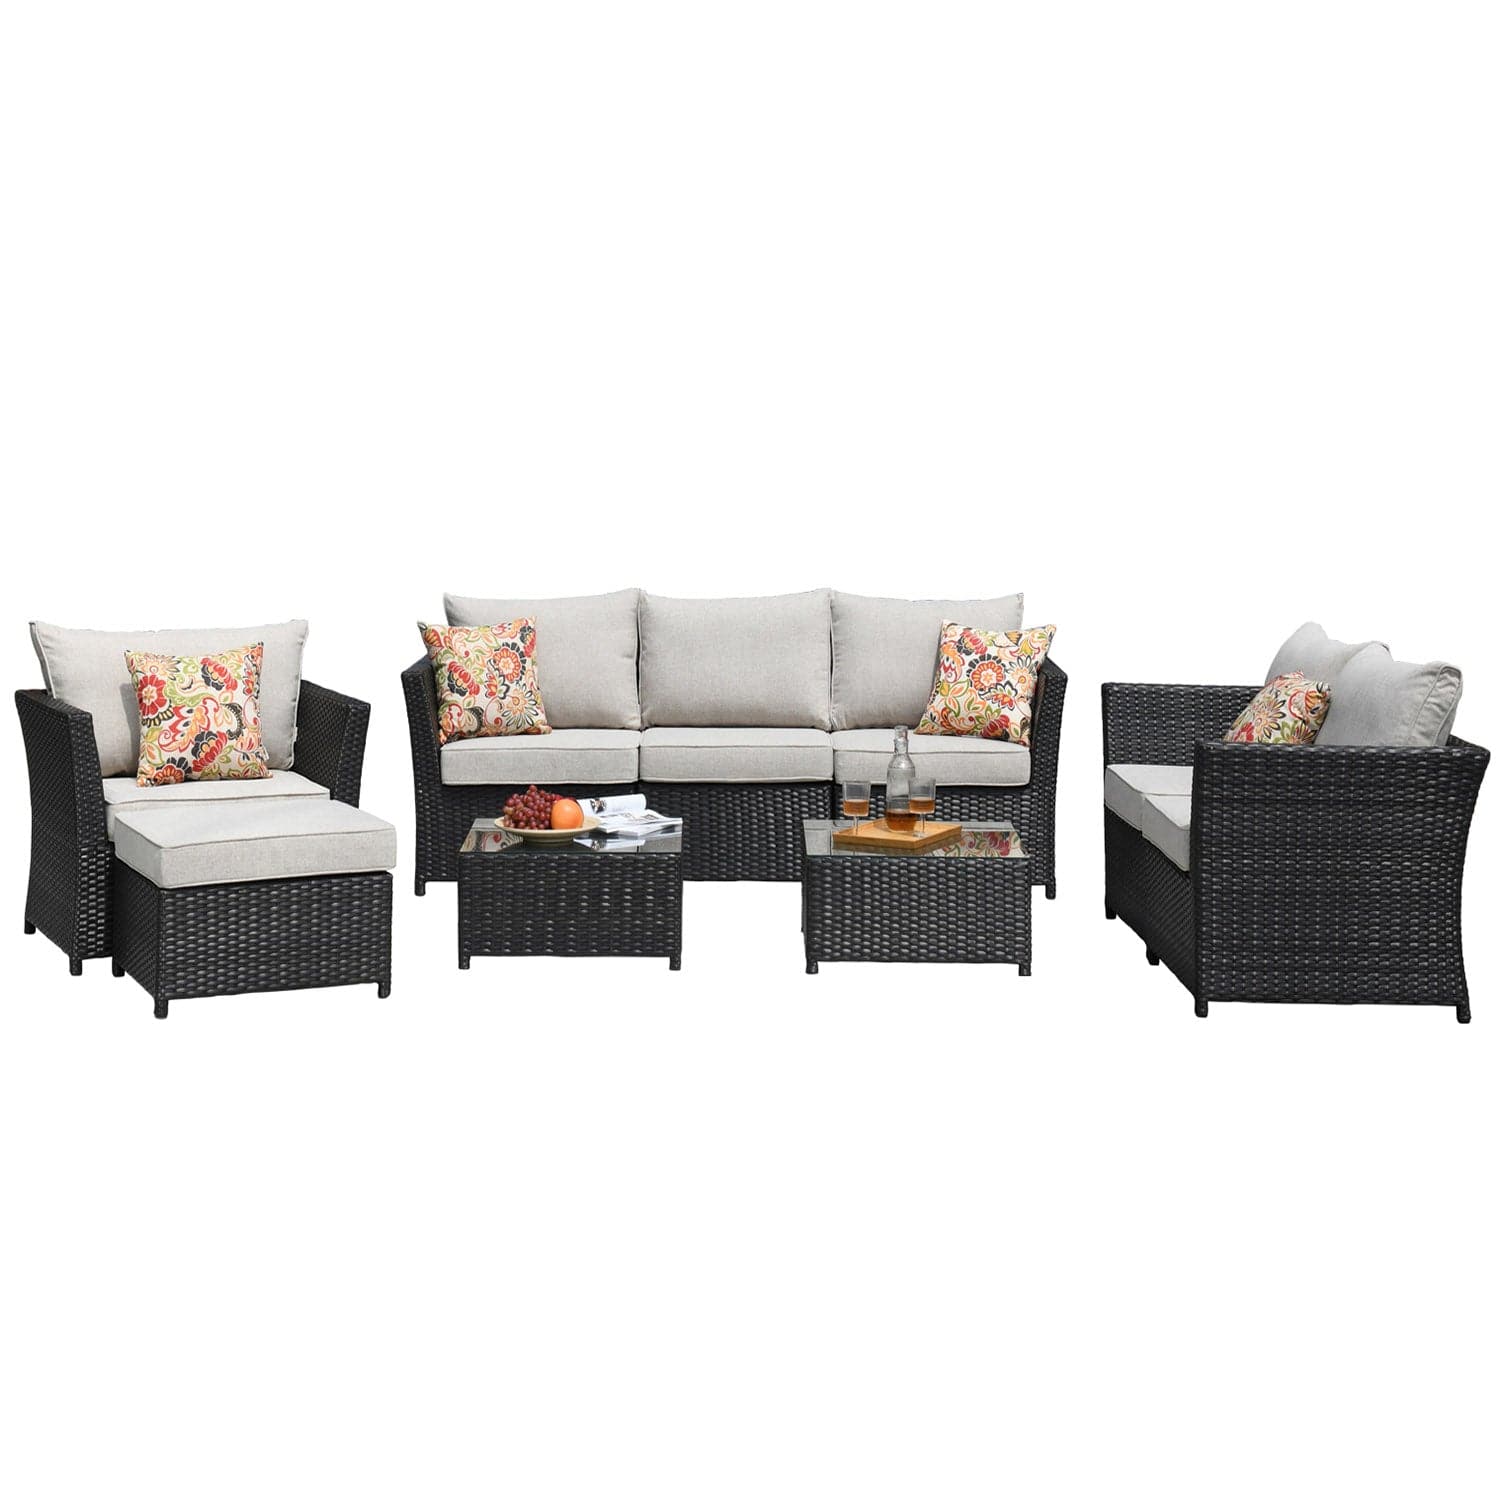 Ovios Patio Conversation Set Rimaru 9-Piece with 4 Pillows, Fully Assembled